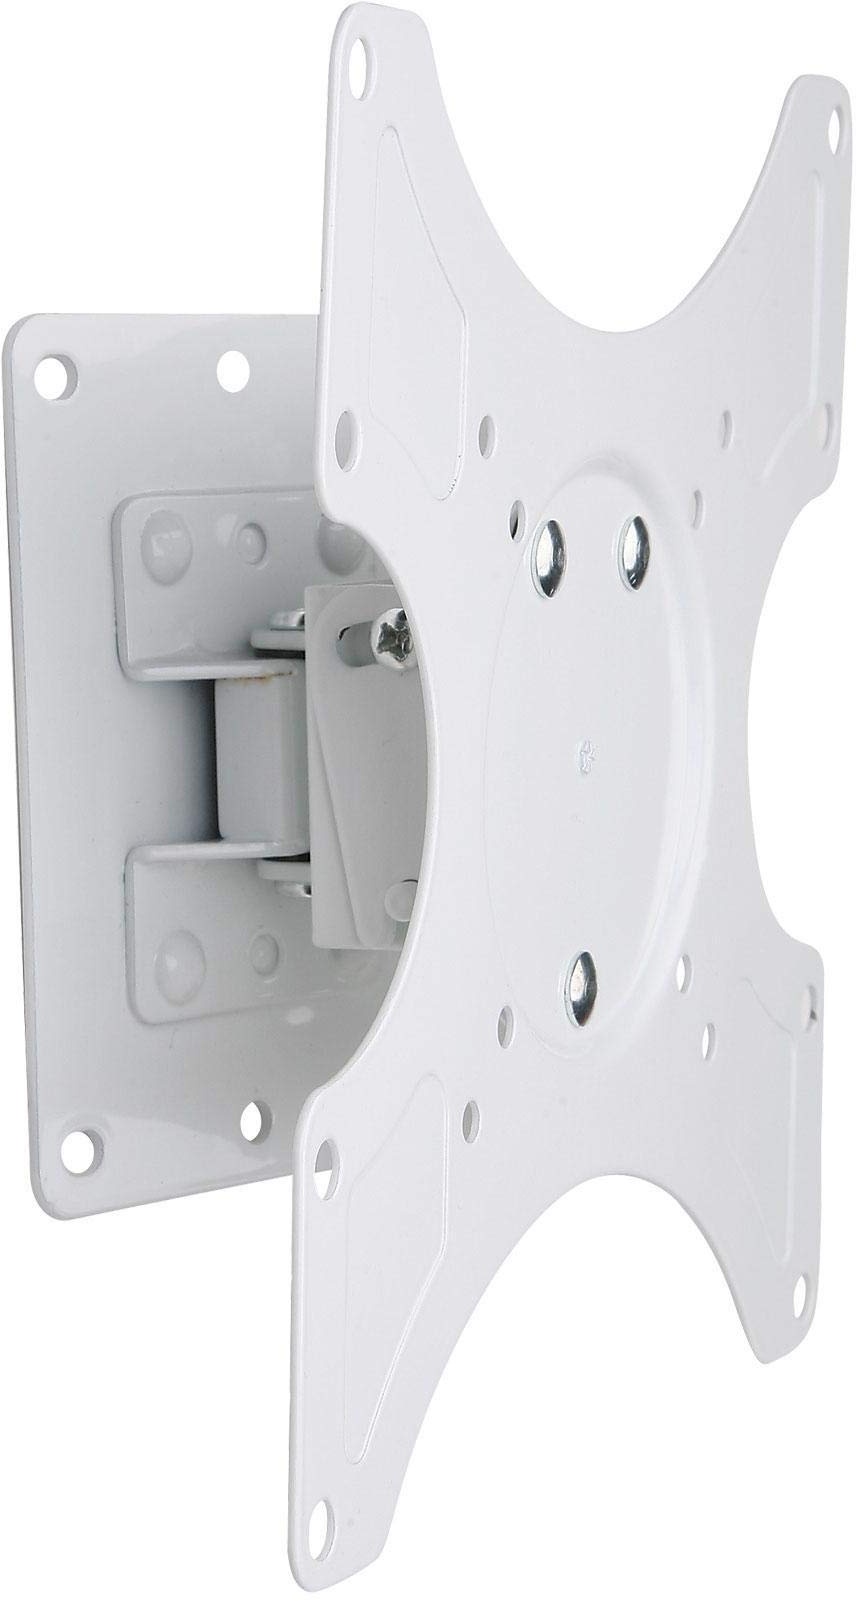 Techly LCD Wall Mount 19-37 White ICA-LCD-2900WH